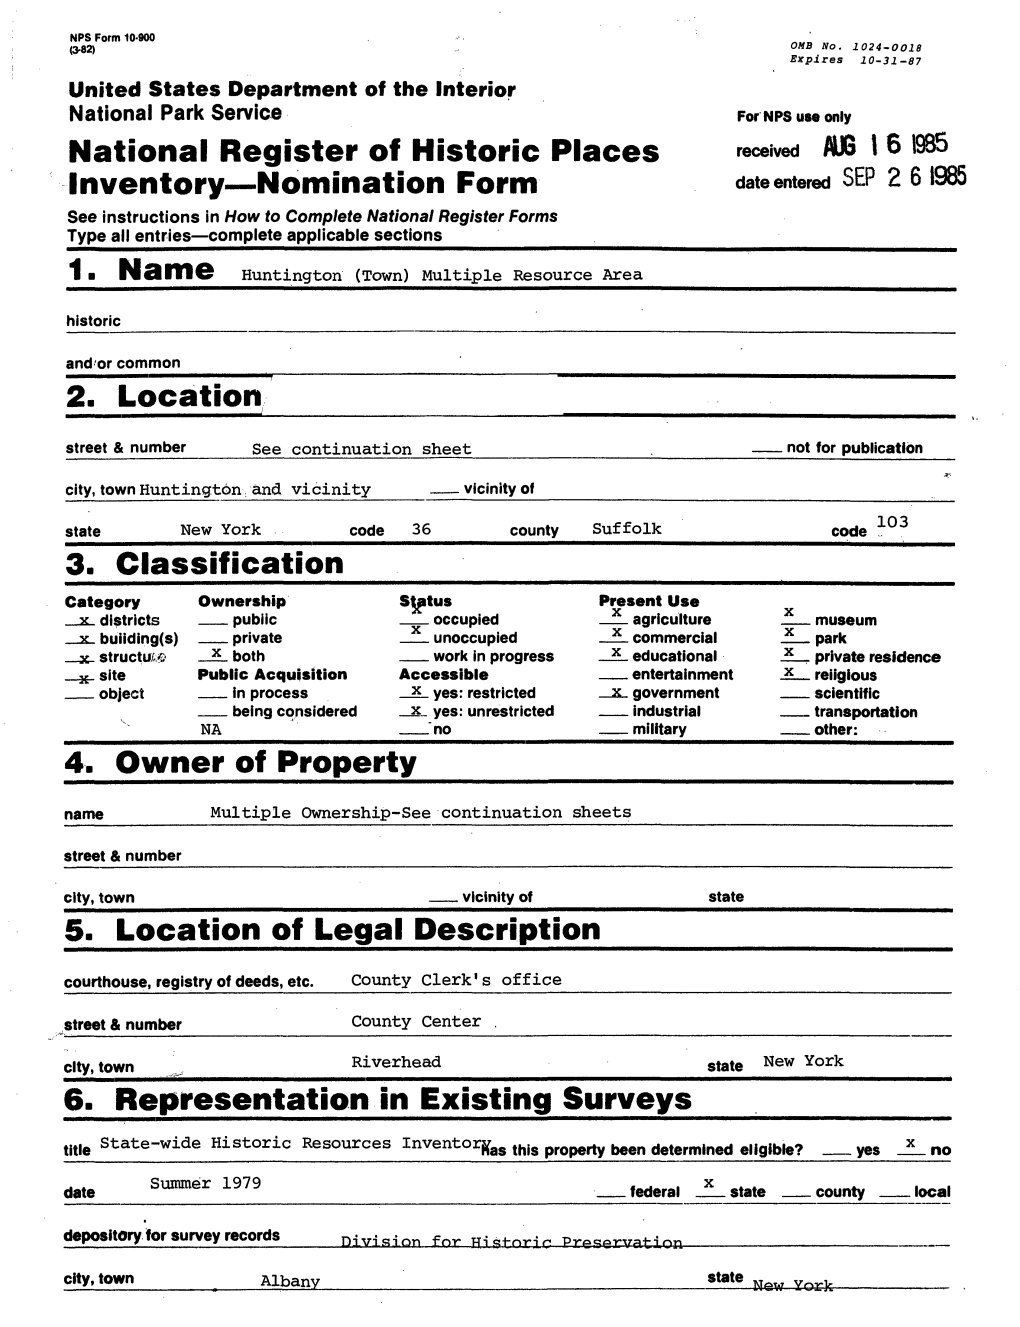 National Register of Historic Places Inventory Nomination Form 2